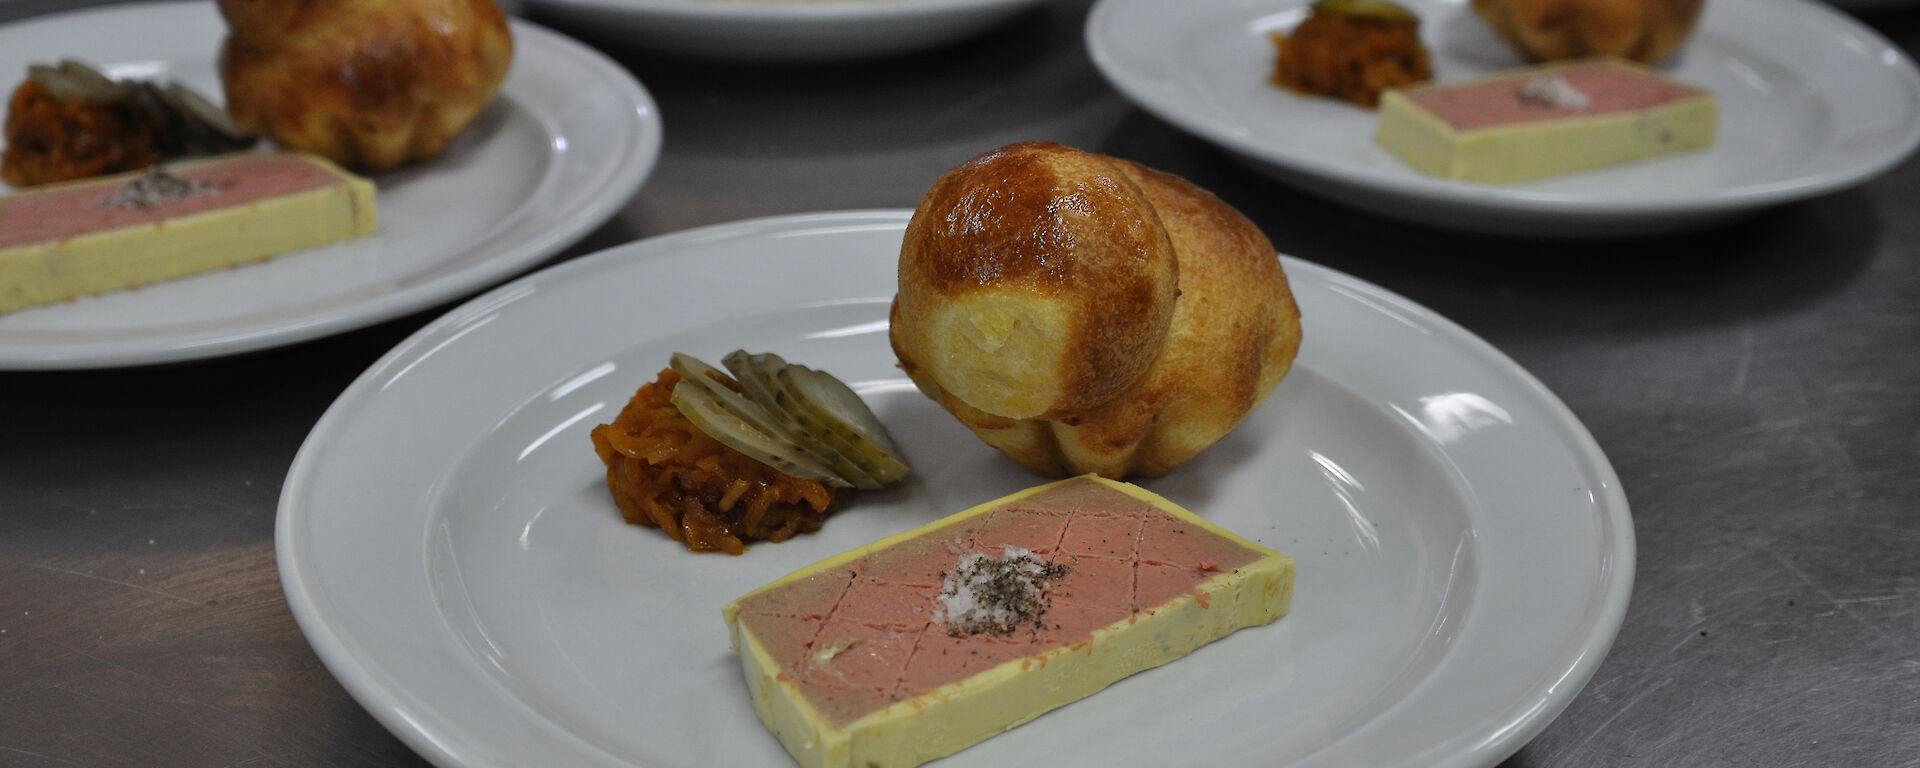 Entrée of pate and brioche plated up and ready to serve pâté